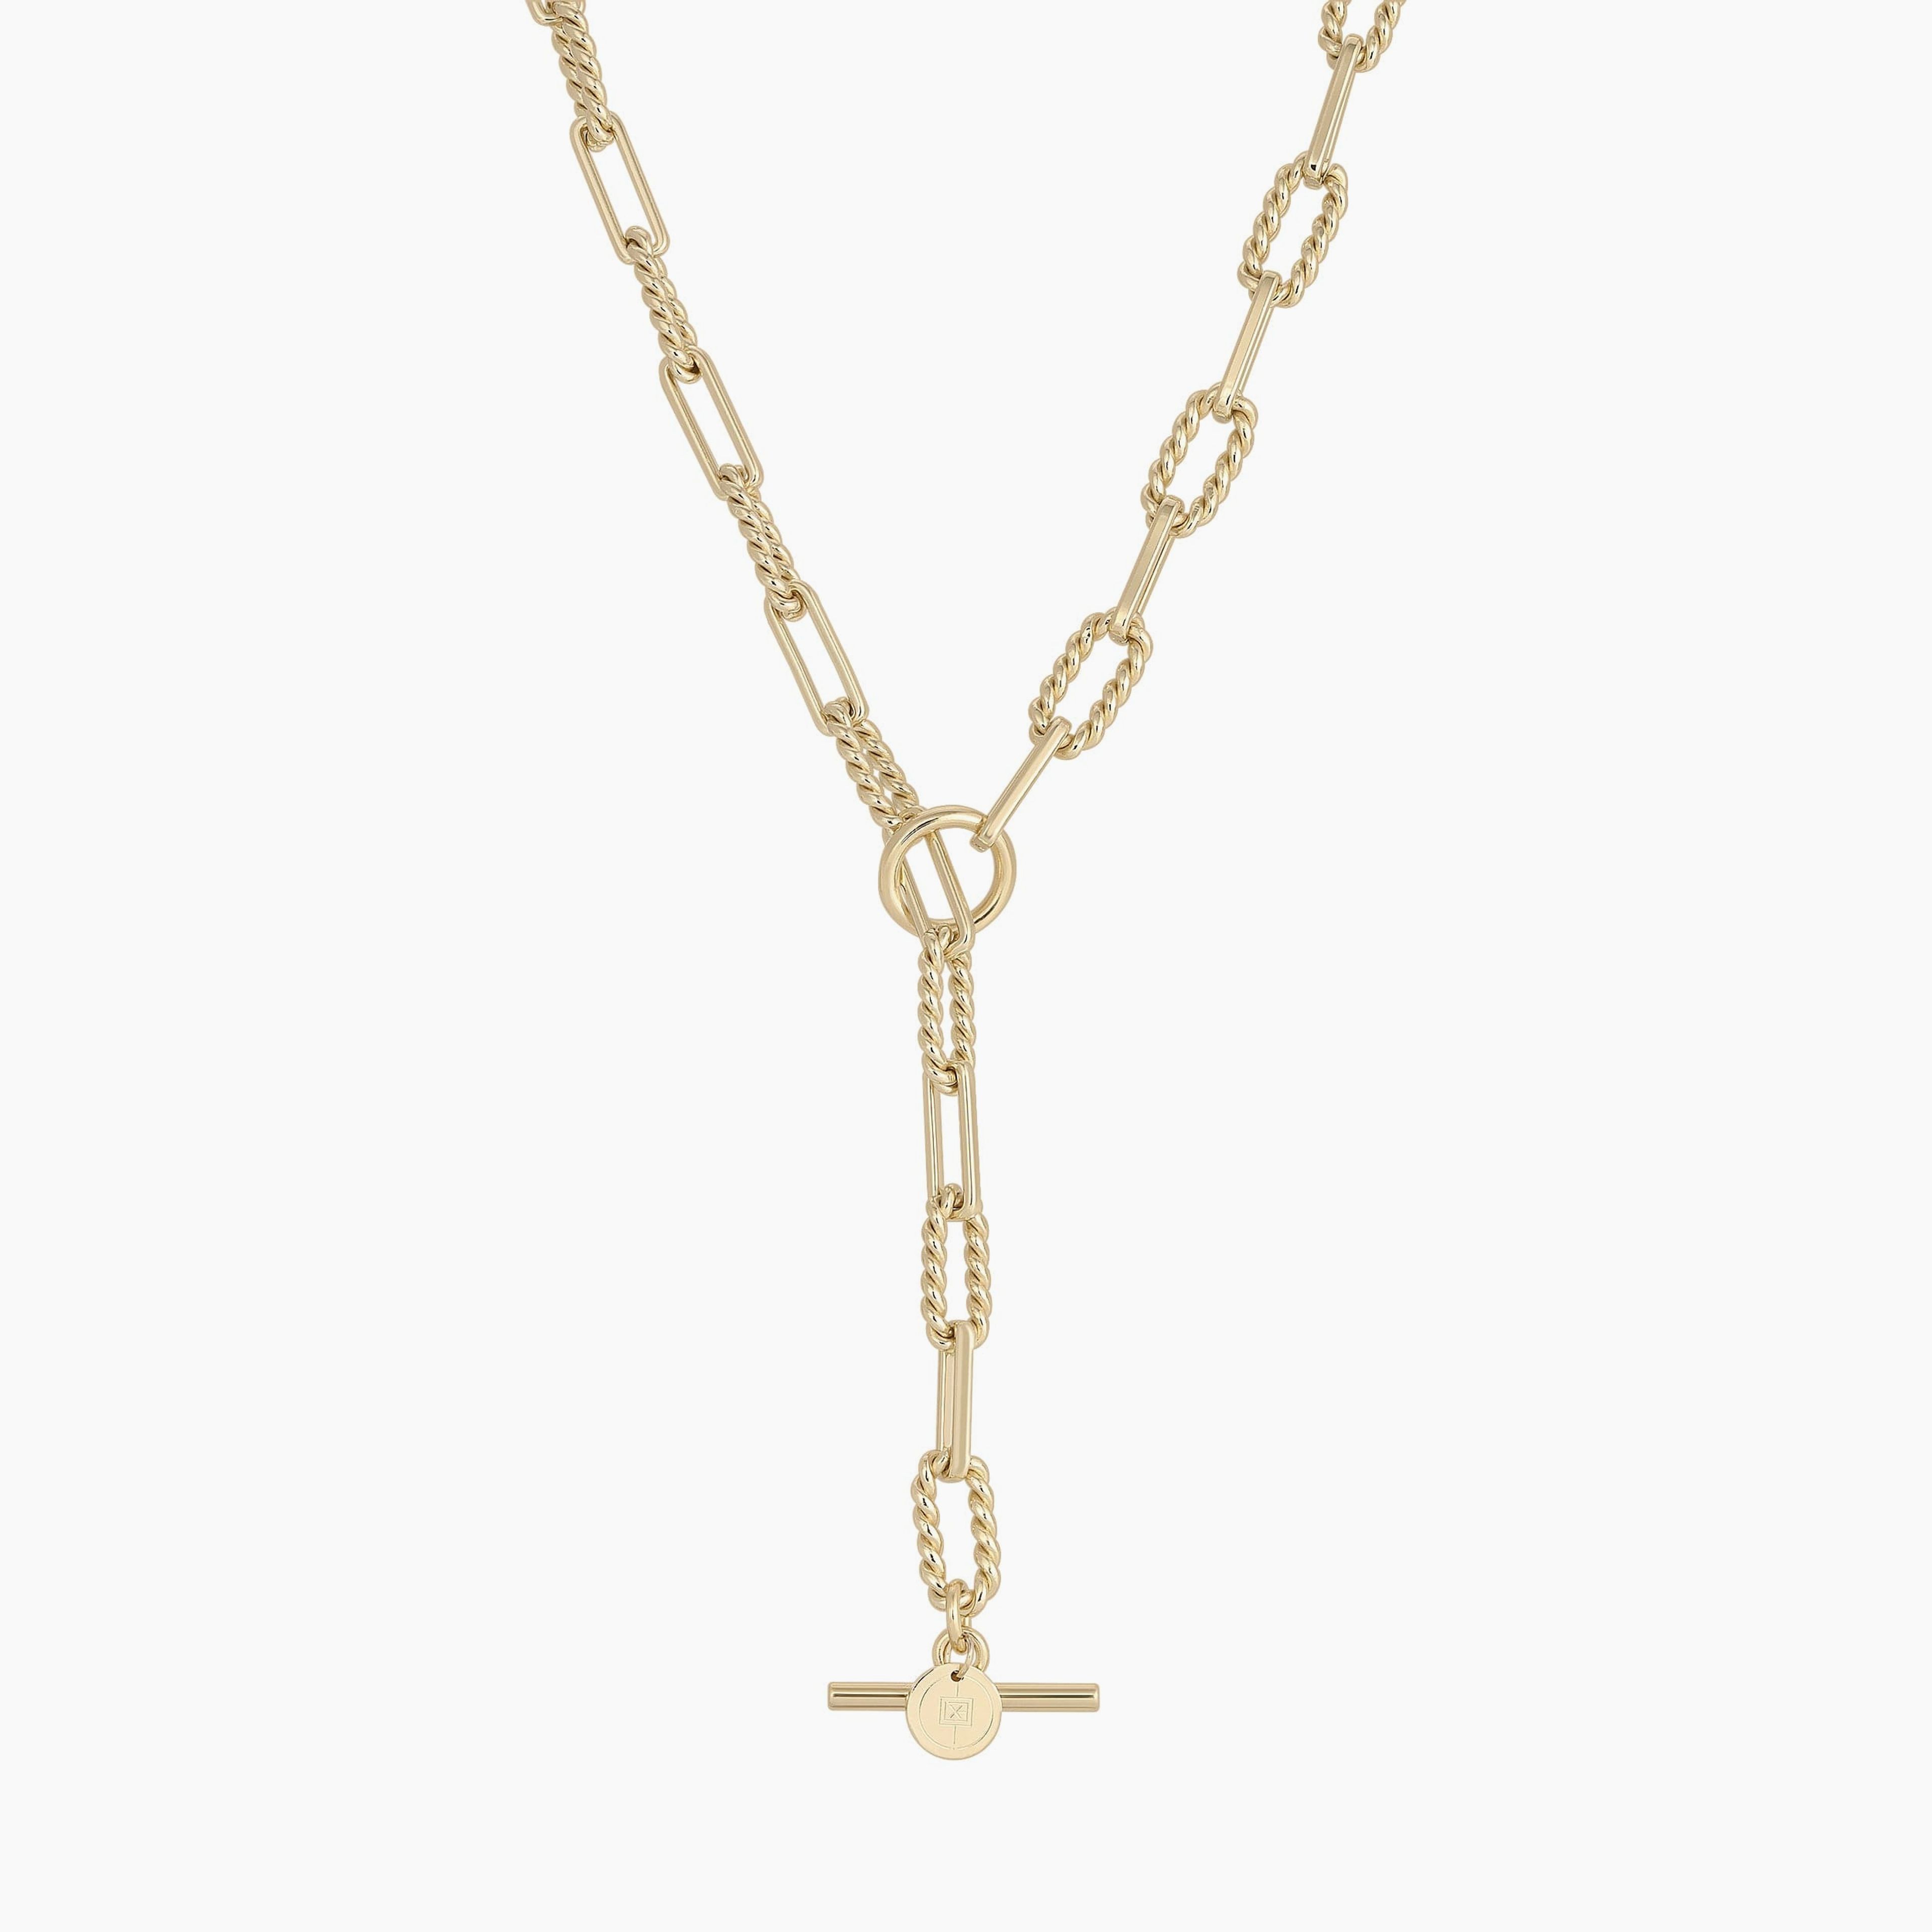 Enzo Toggle Convertible Lariat Necklace